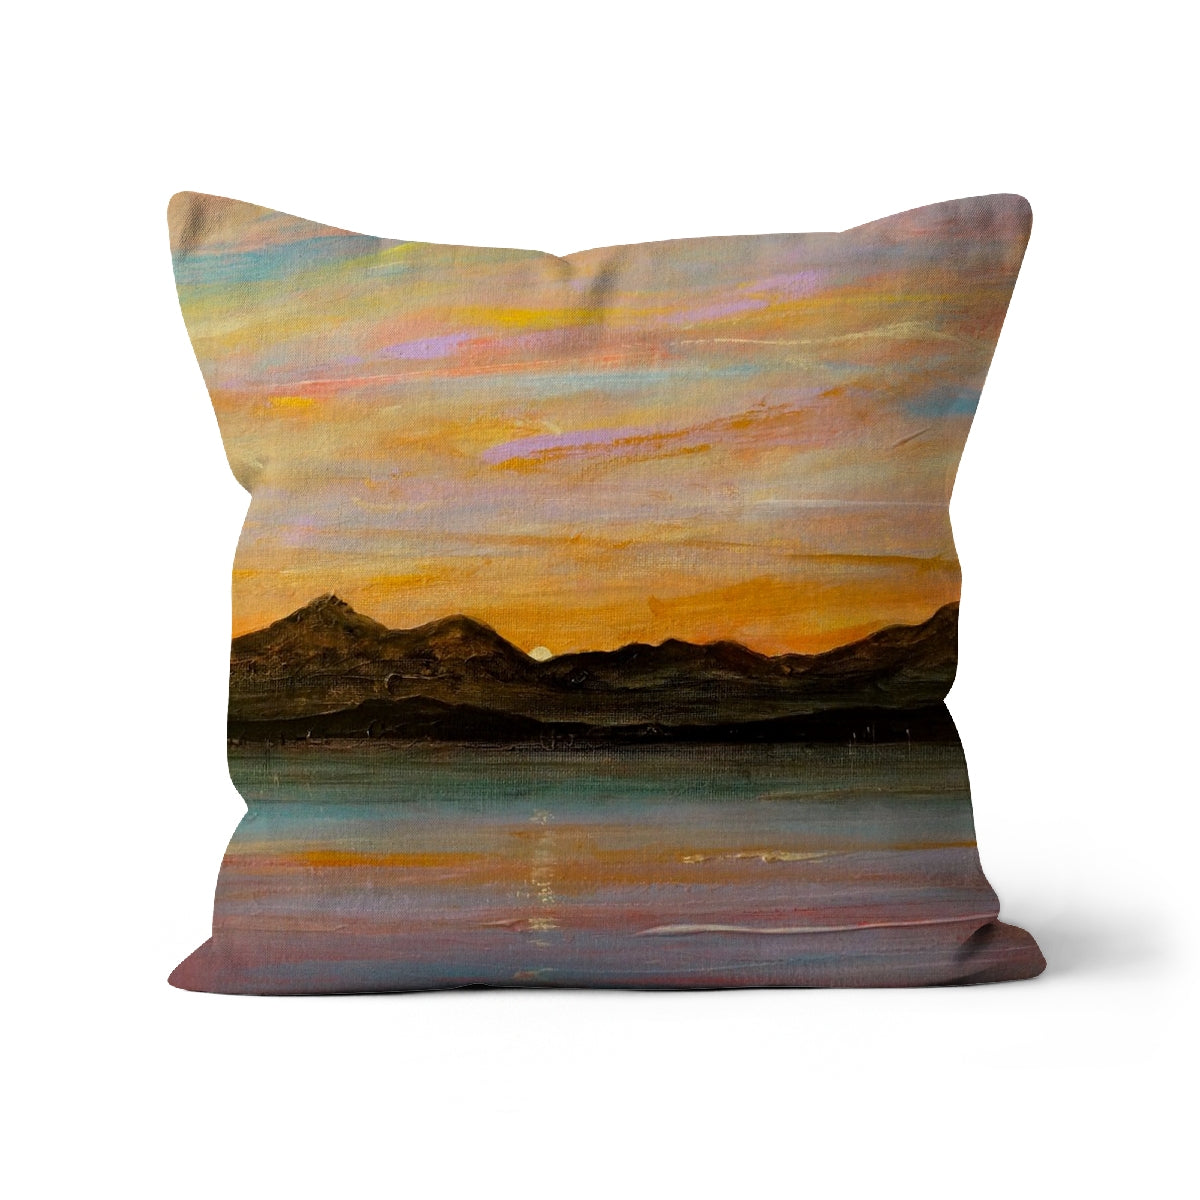 The Sleeping Warrior Arran Art Gifts Cushion-Cushions-Arran Art Gallery-Canvas-12"x12"-Paintings, Prints, Homeware, Art Gifts From Scotland By Scottish Artist Kevin Hunter